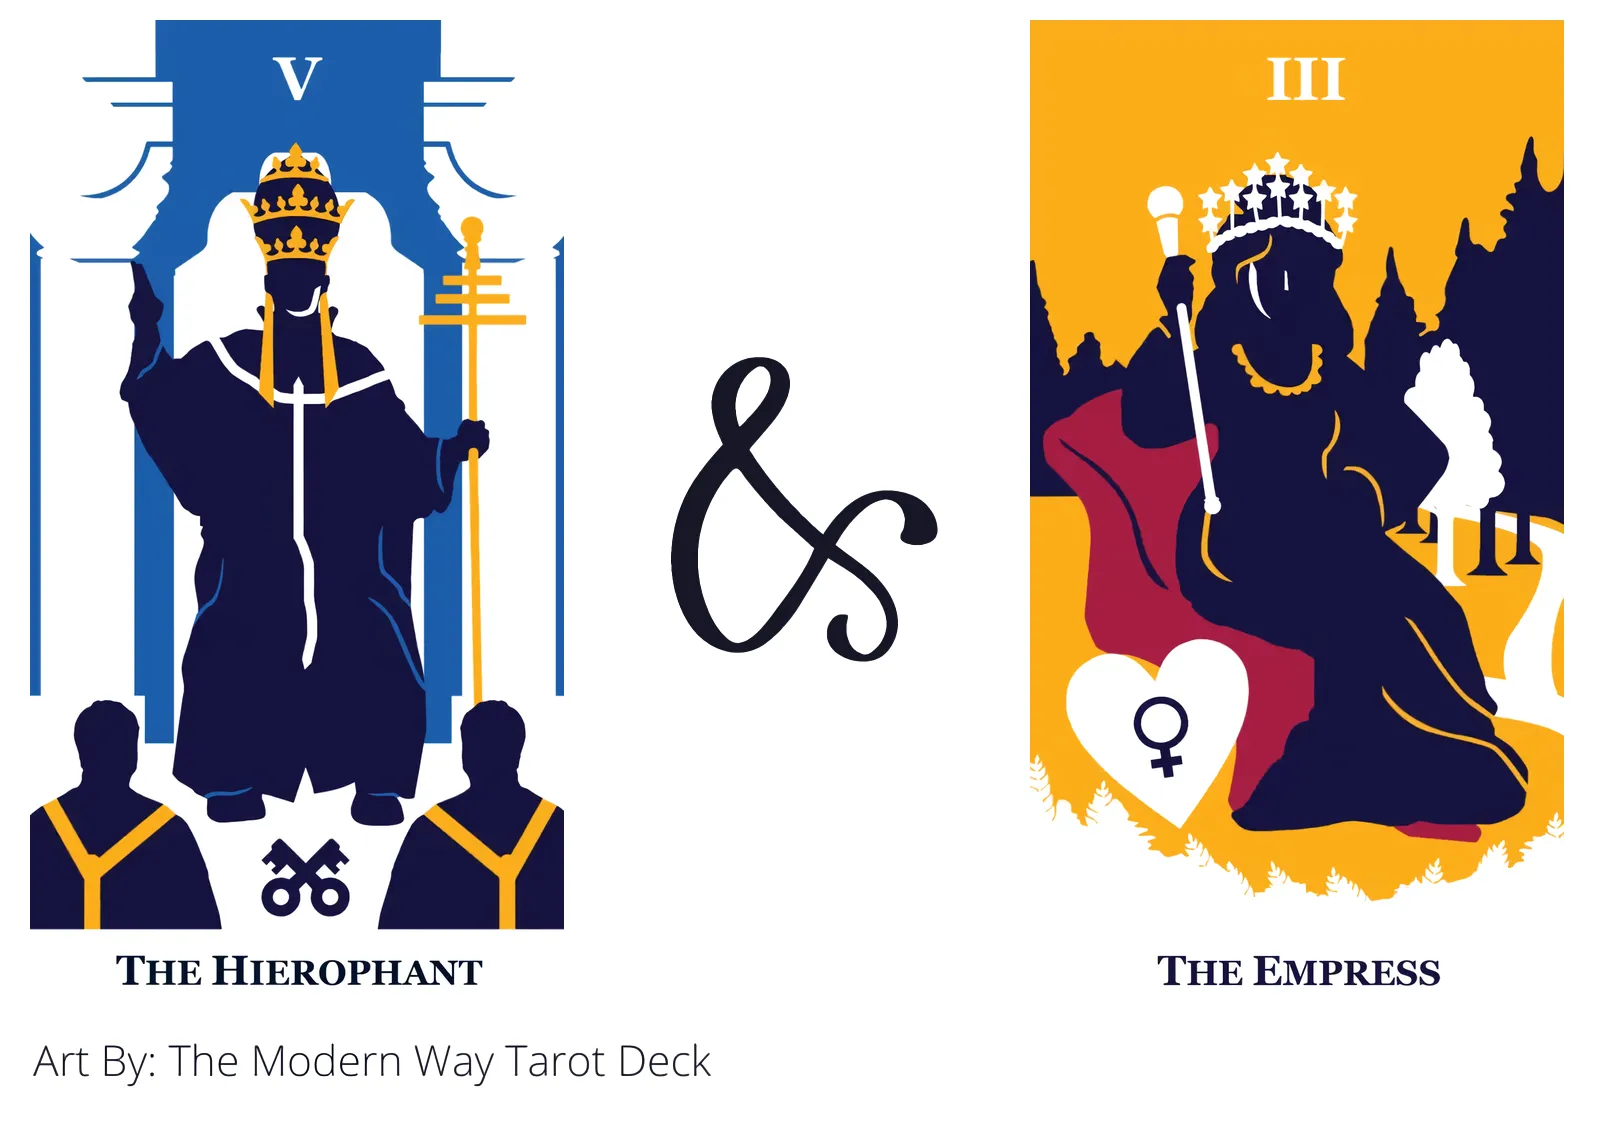 the hierophant and the empress tarot cards together